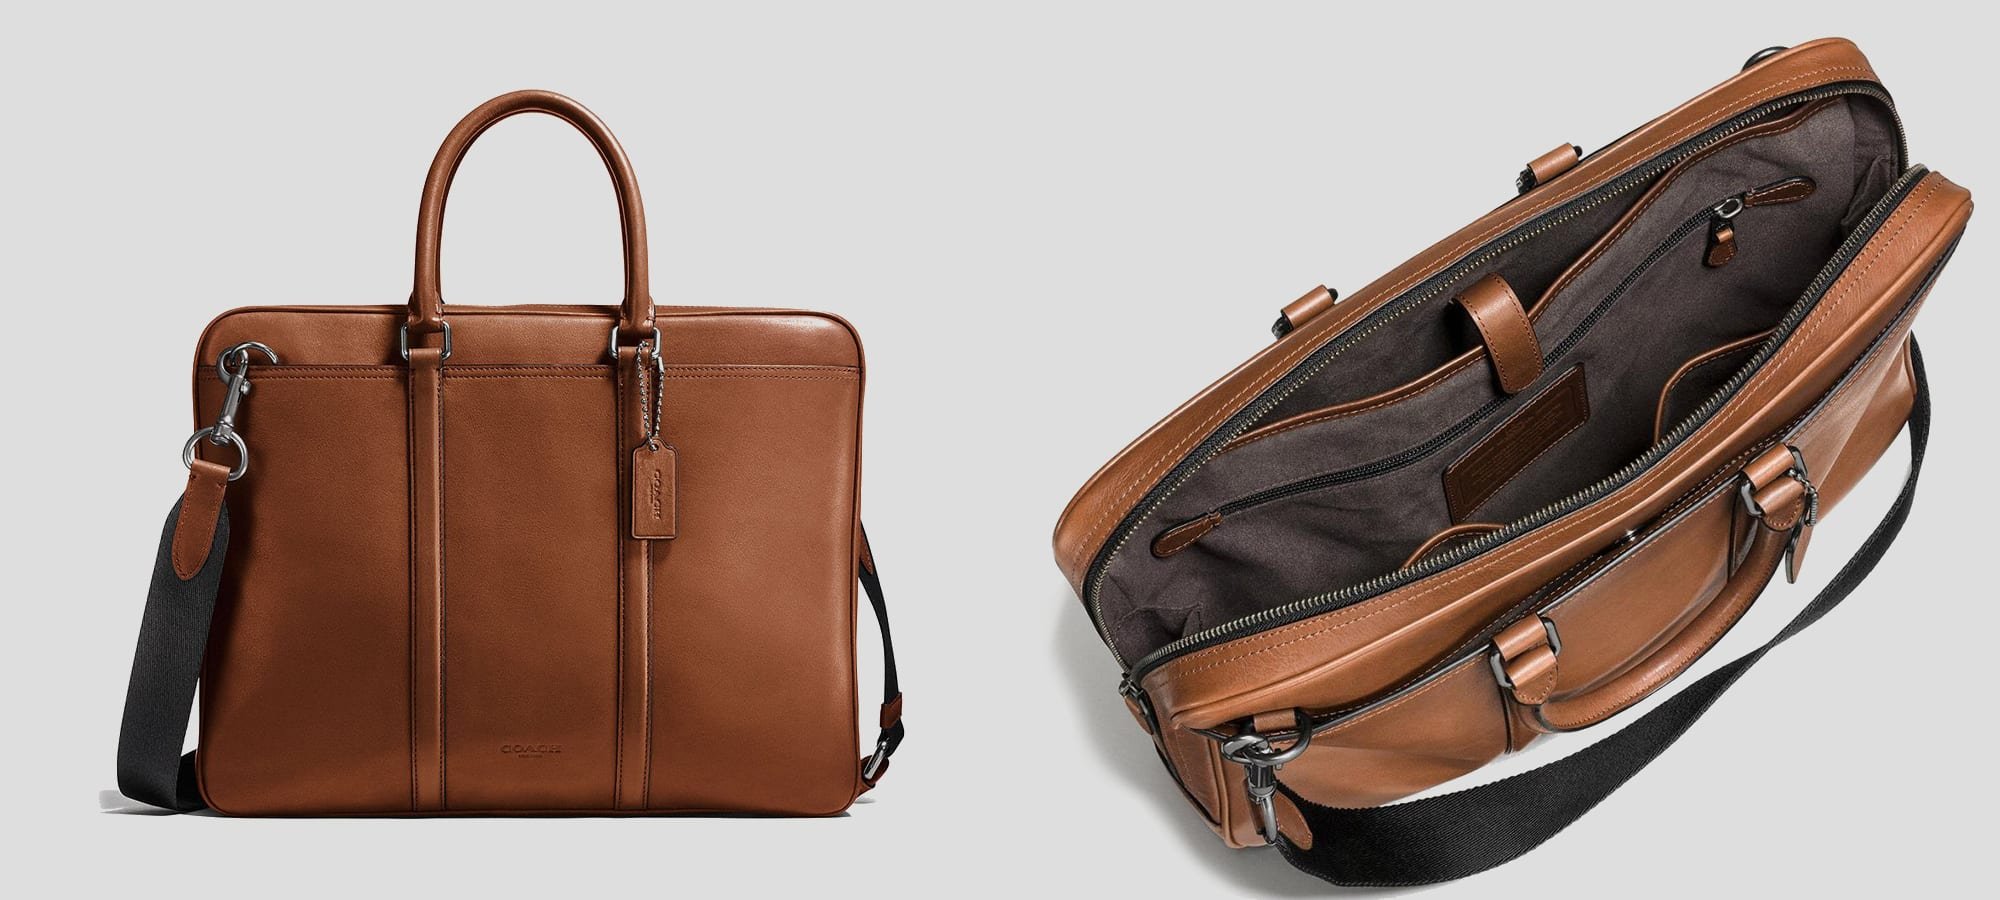 The best men's work bags at 8 different price points